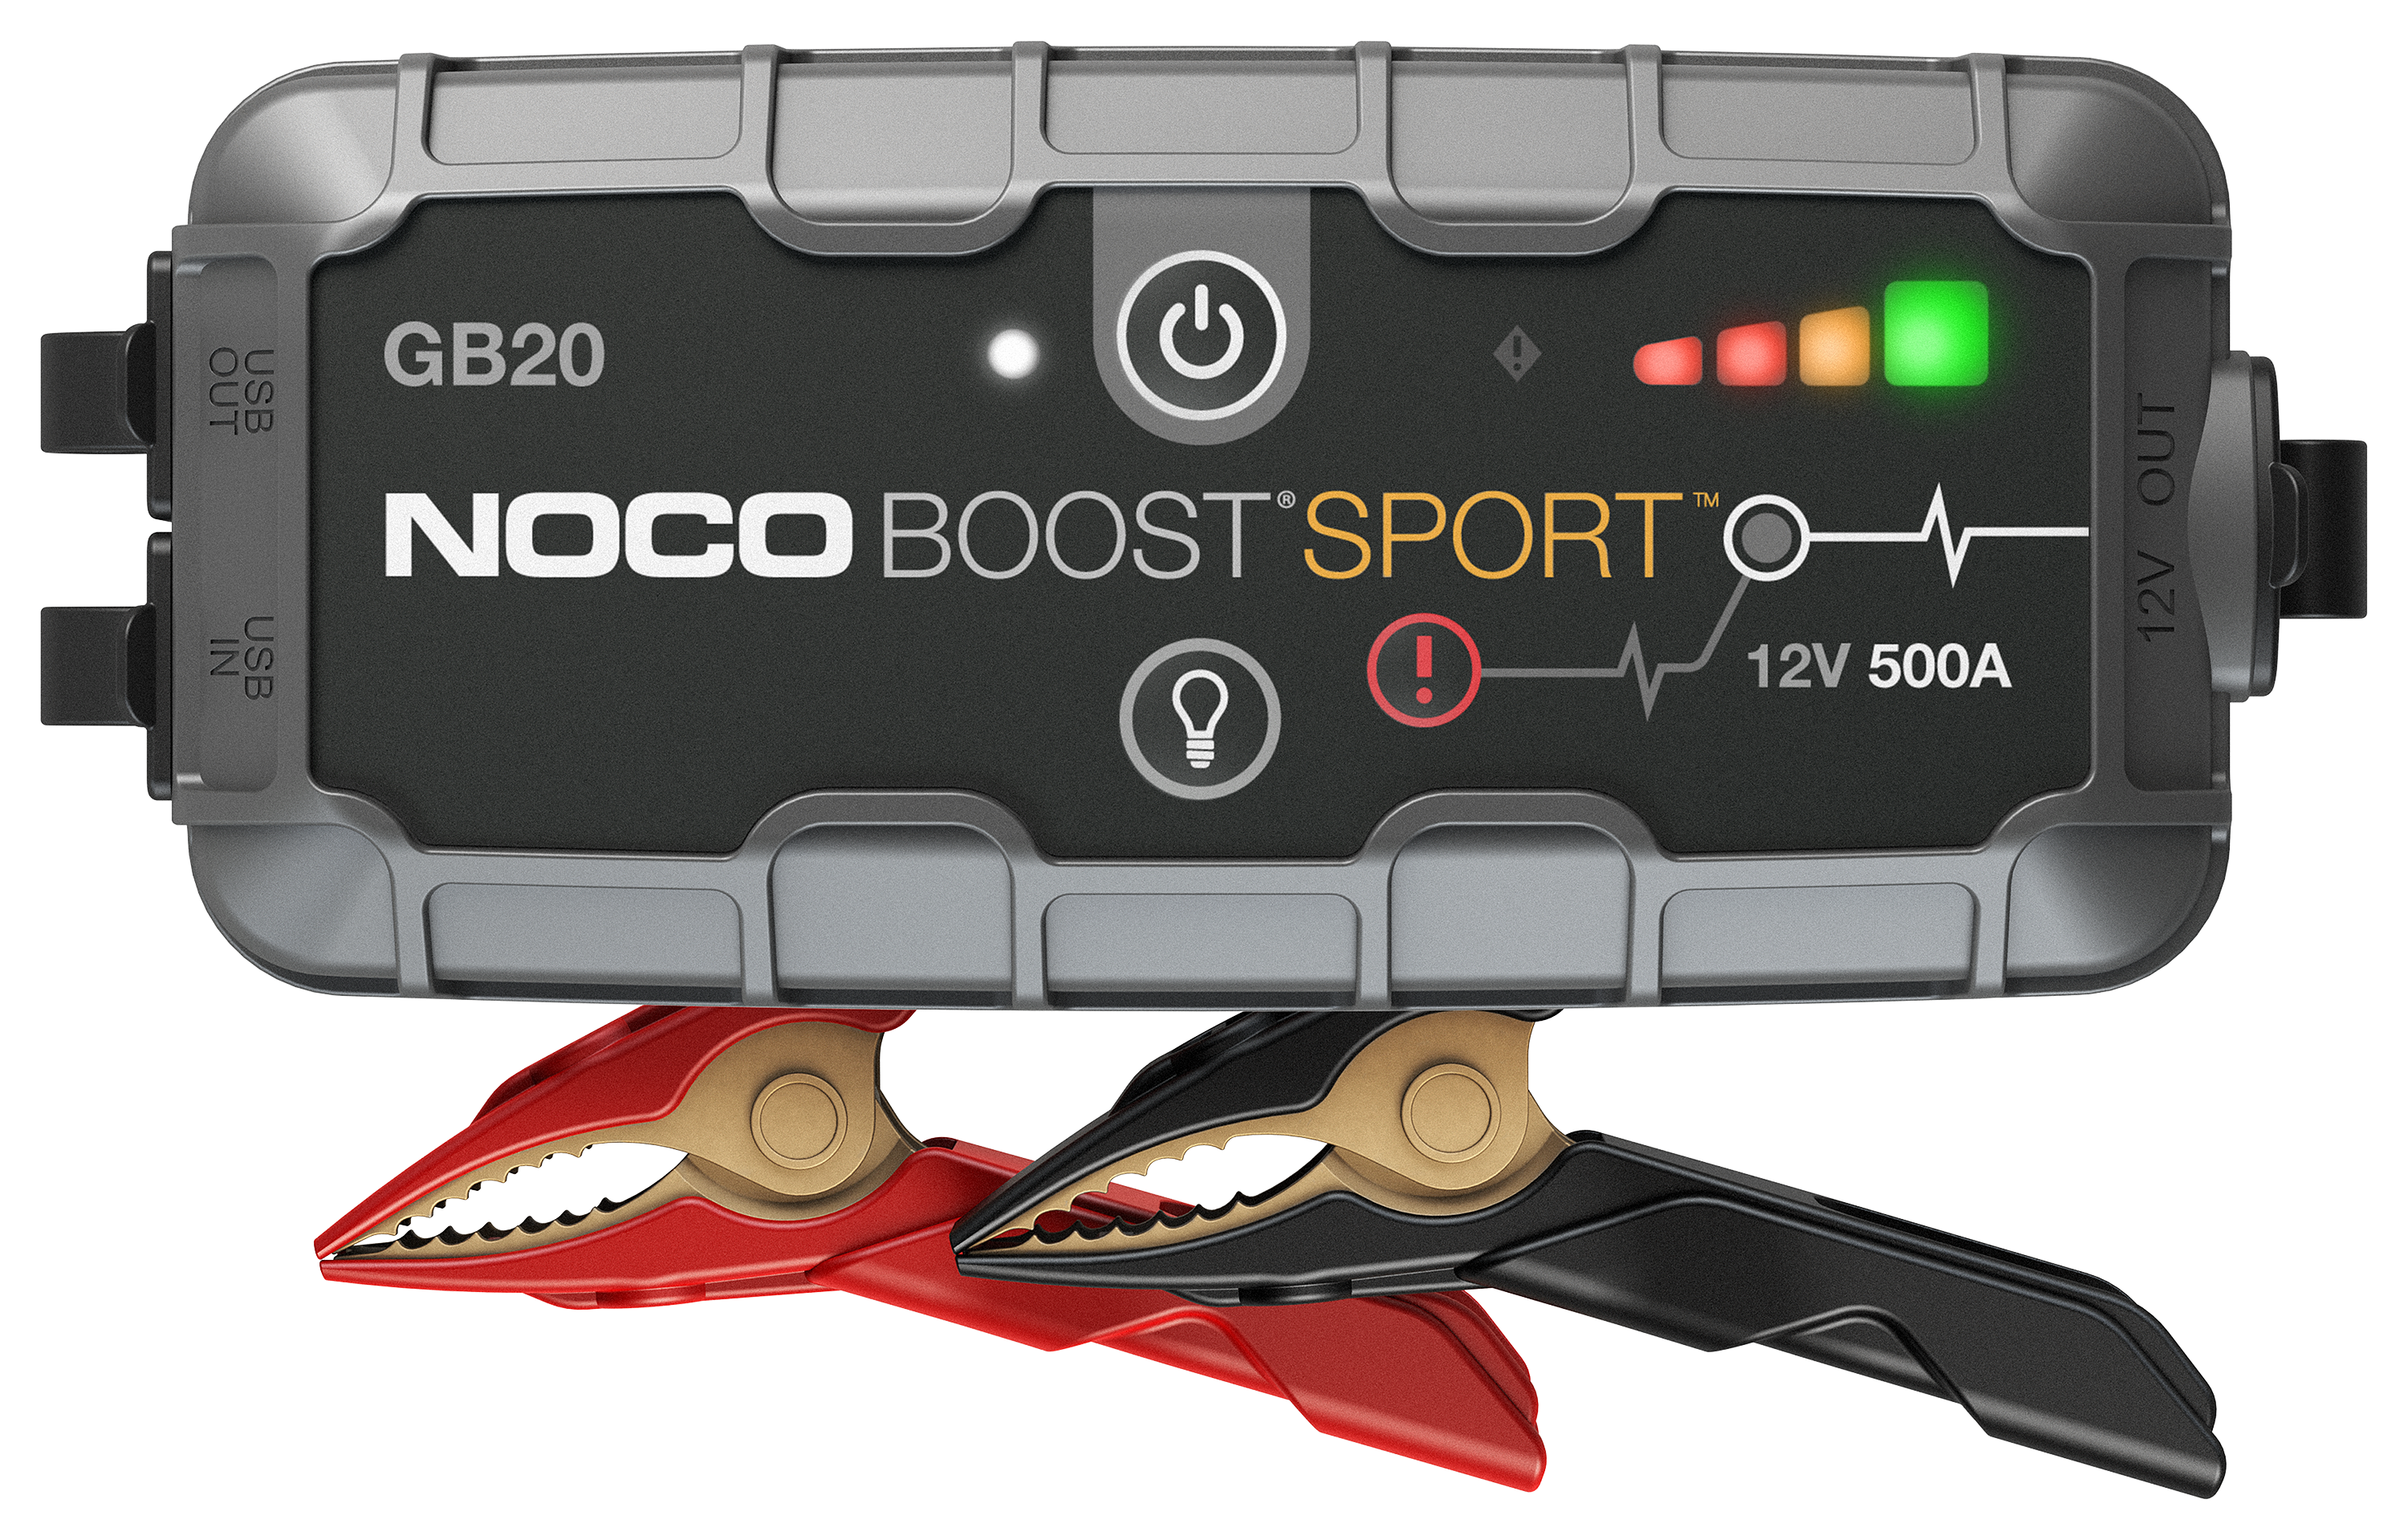 noco boost hd GB70 wont charge or start 